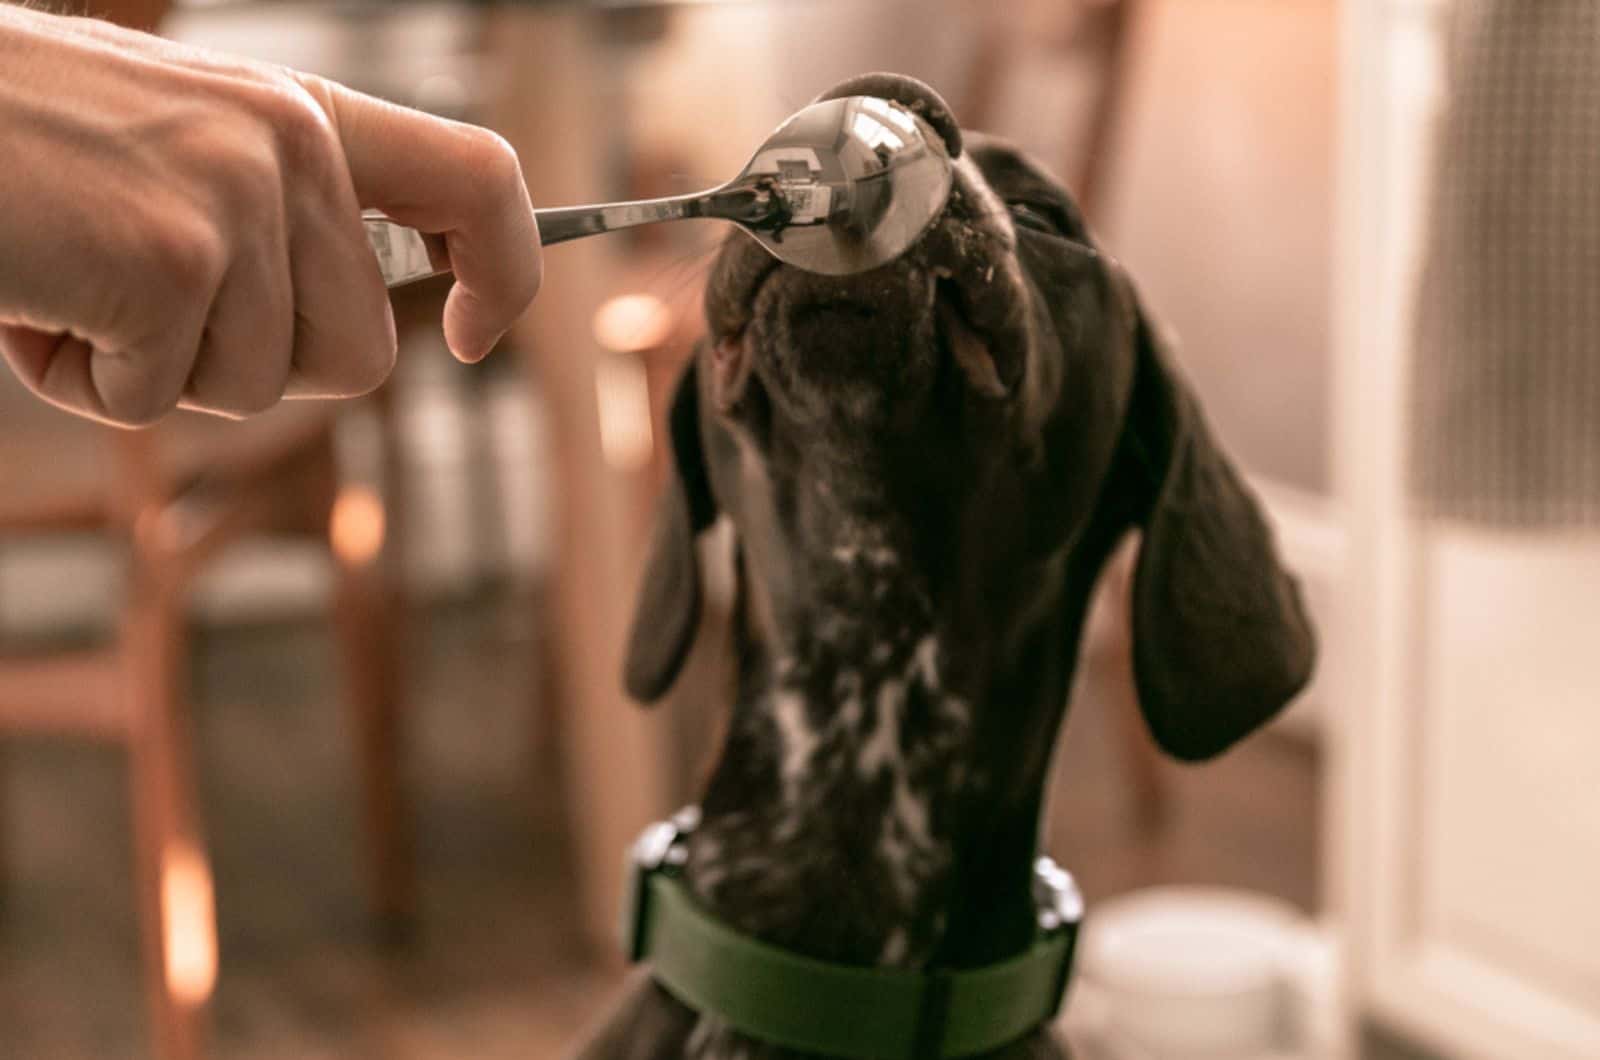 dog licking a spoon in owner's hand